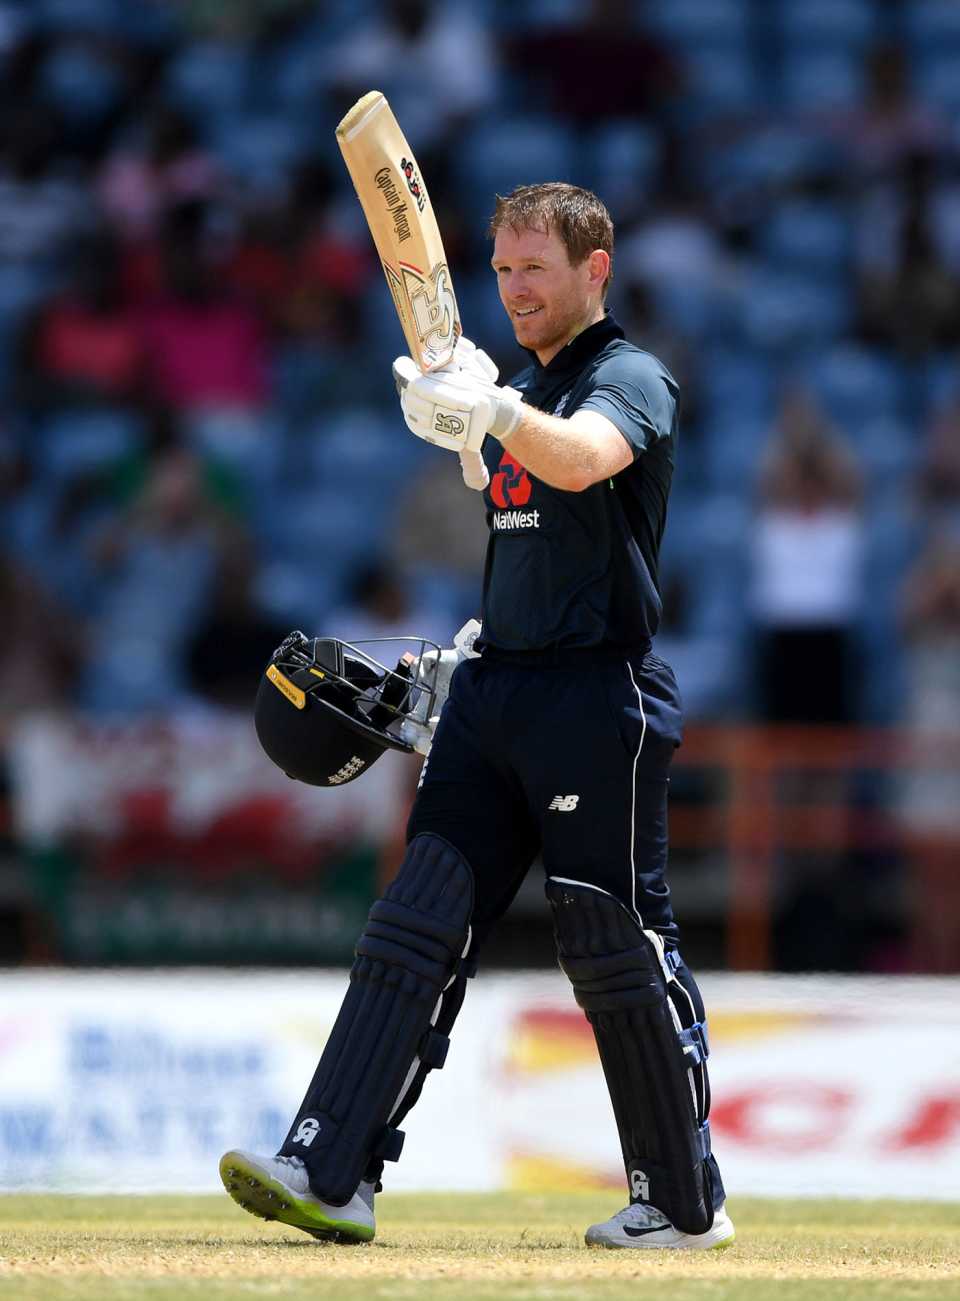 Eoin Morgan brings up his century, West Indies v England, 4th ODI, Grenada, February 27, 2019